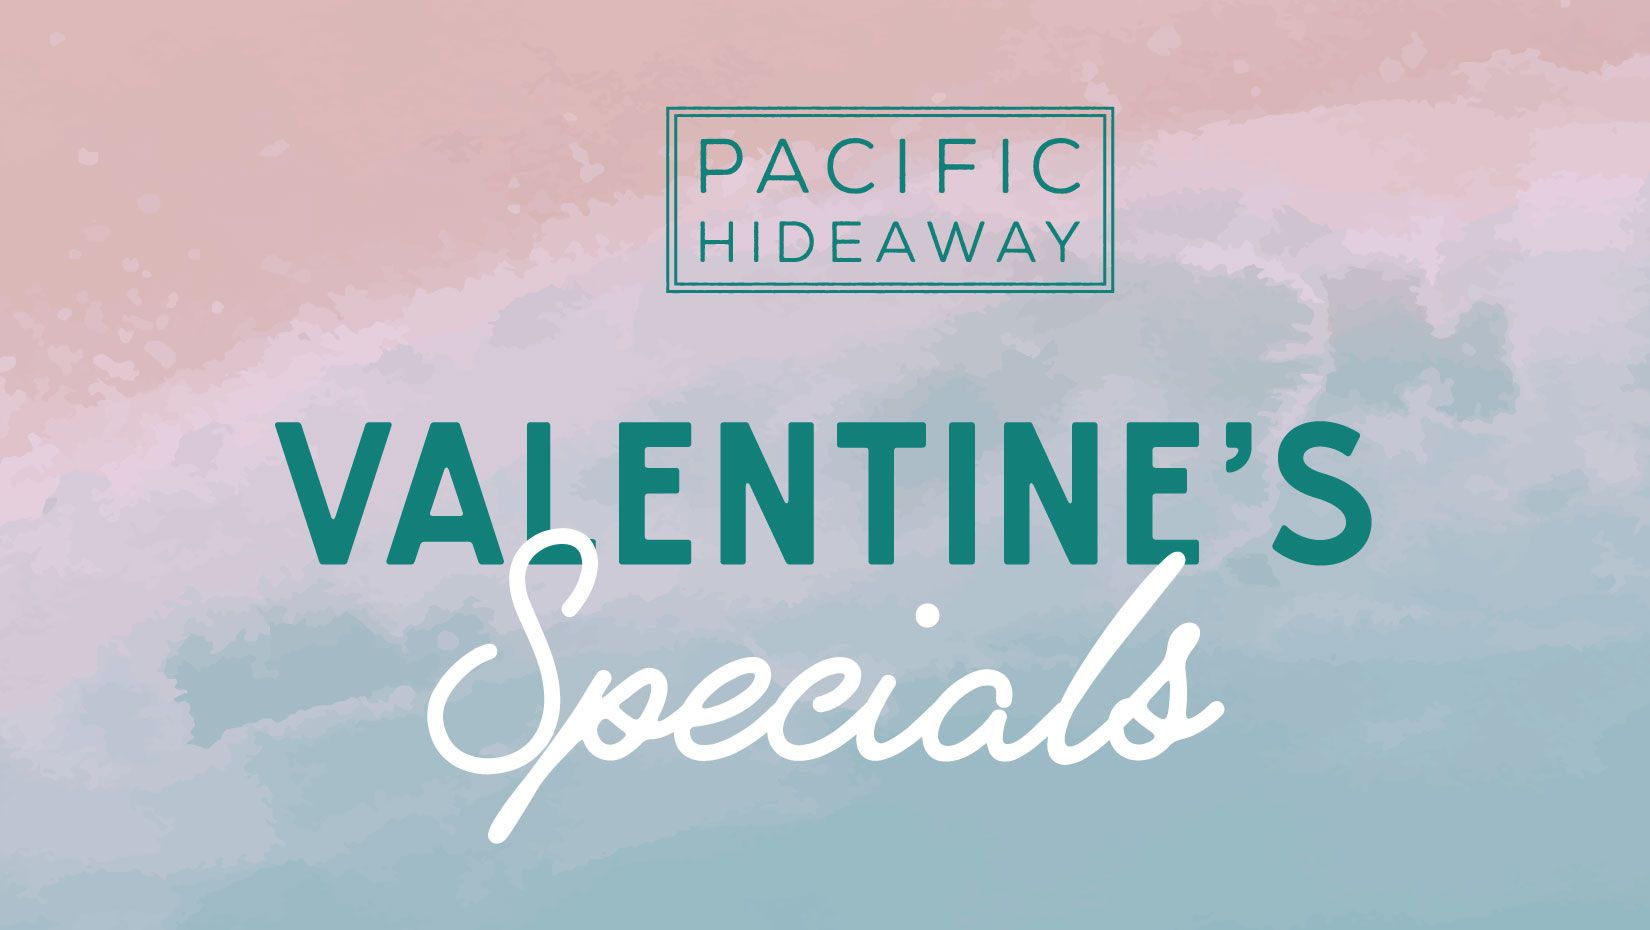 Pacific Hideaway special event